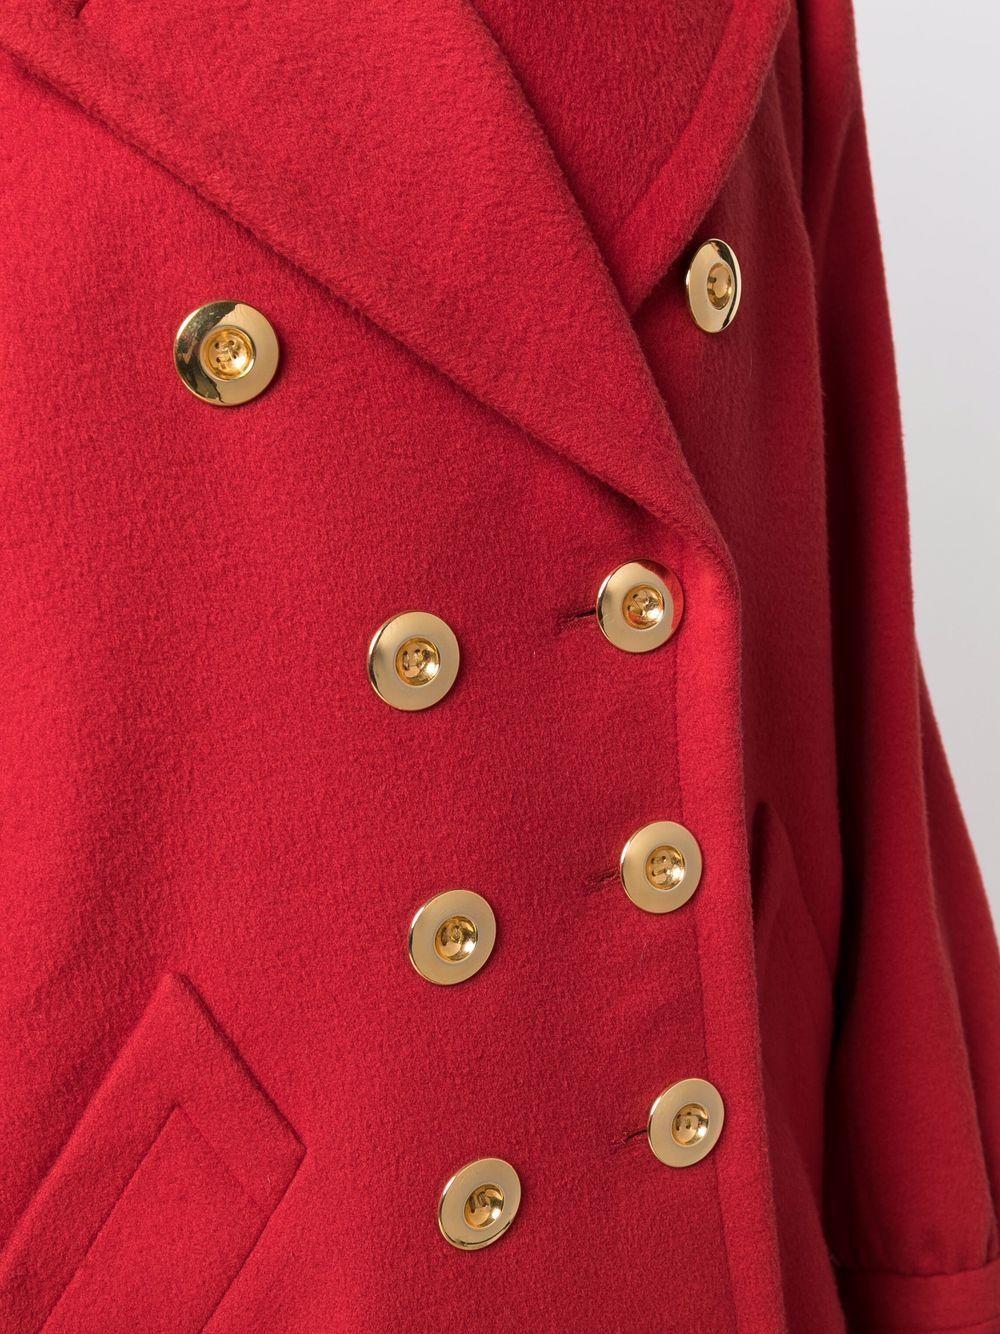 1990s YSL Yves Saint Laurent Red Wool Coat  In Good Condition For Sale In Paris, FR